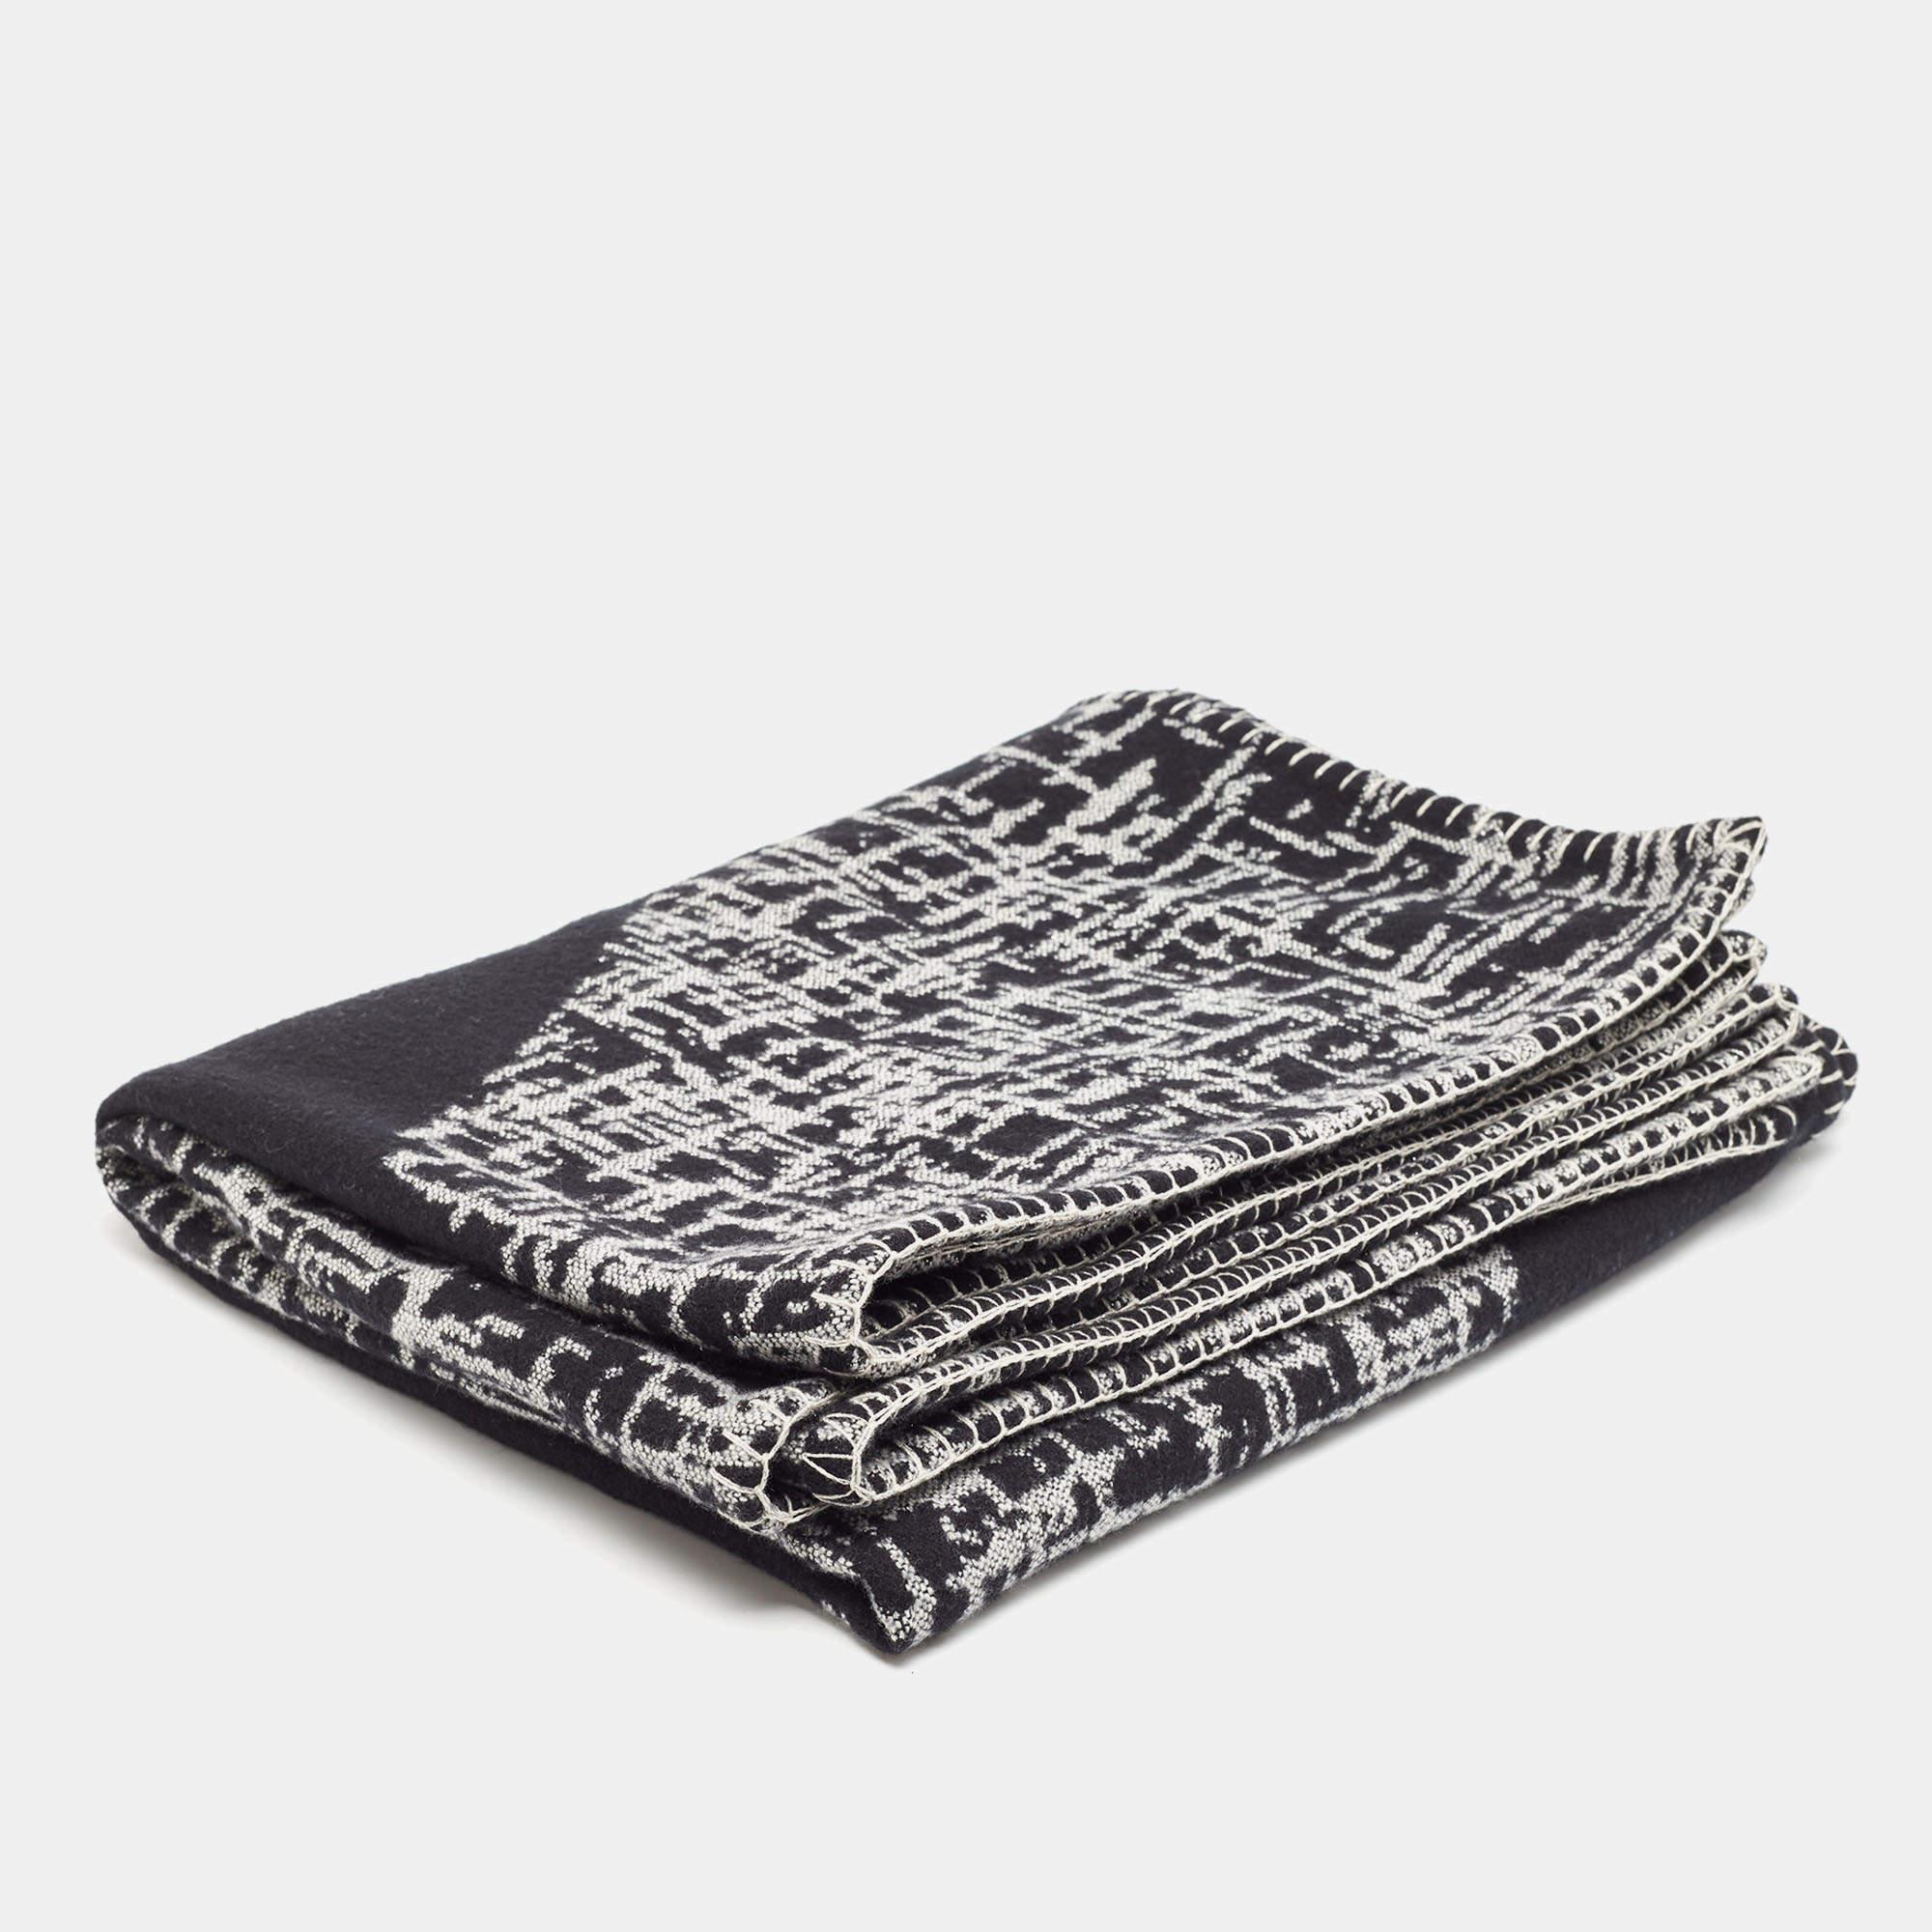 The Chanel throw blanket is a luxurious home accessory, seamlessly blending sophistication with comfort. Crafted from high-quality wool and adorned with a chic black and grey pattern, it offers a cozy, reversible design, making it a stylish and